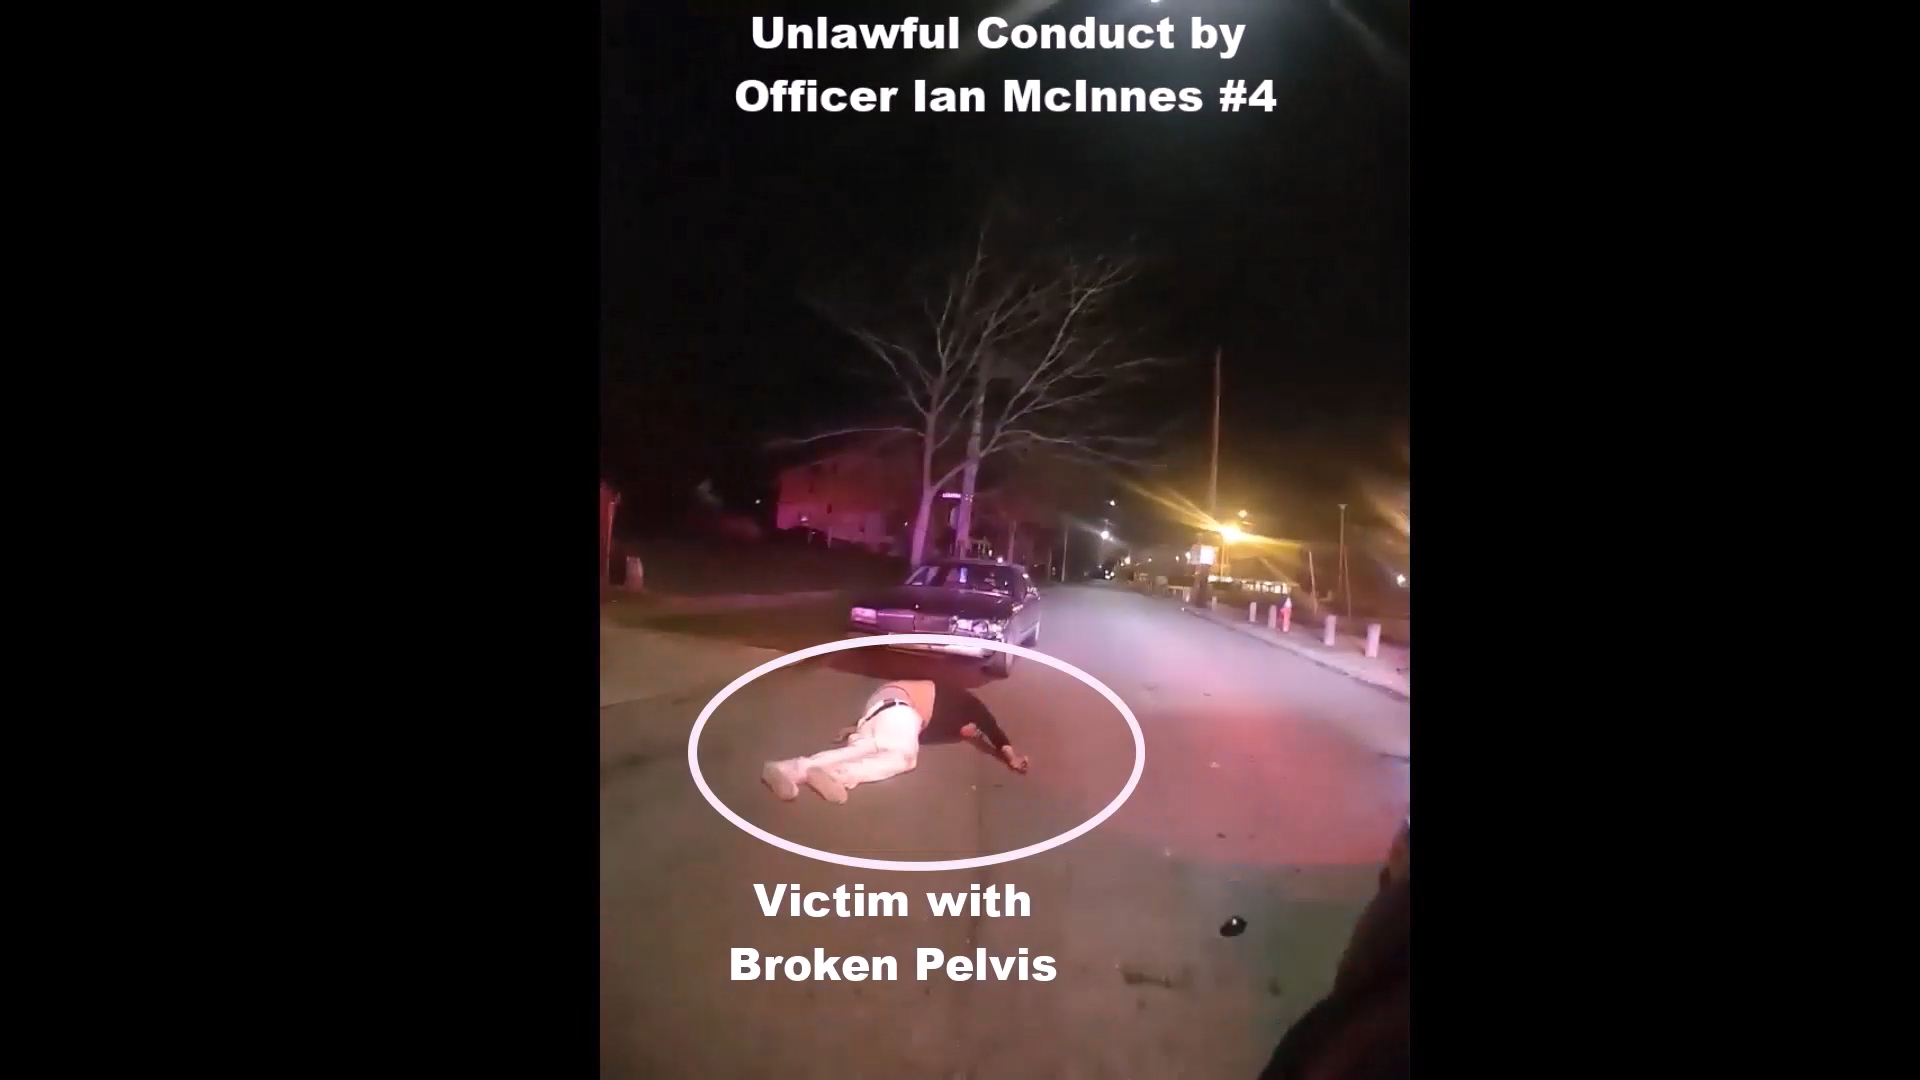 PHOTO: An image from East Cleveland police body cam footage shows a suspect laying on the ground with a broken pelvis after being struck by a police vehicle, released as part of their investigation into police misconduct.